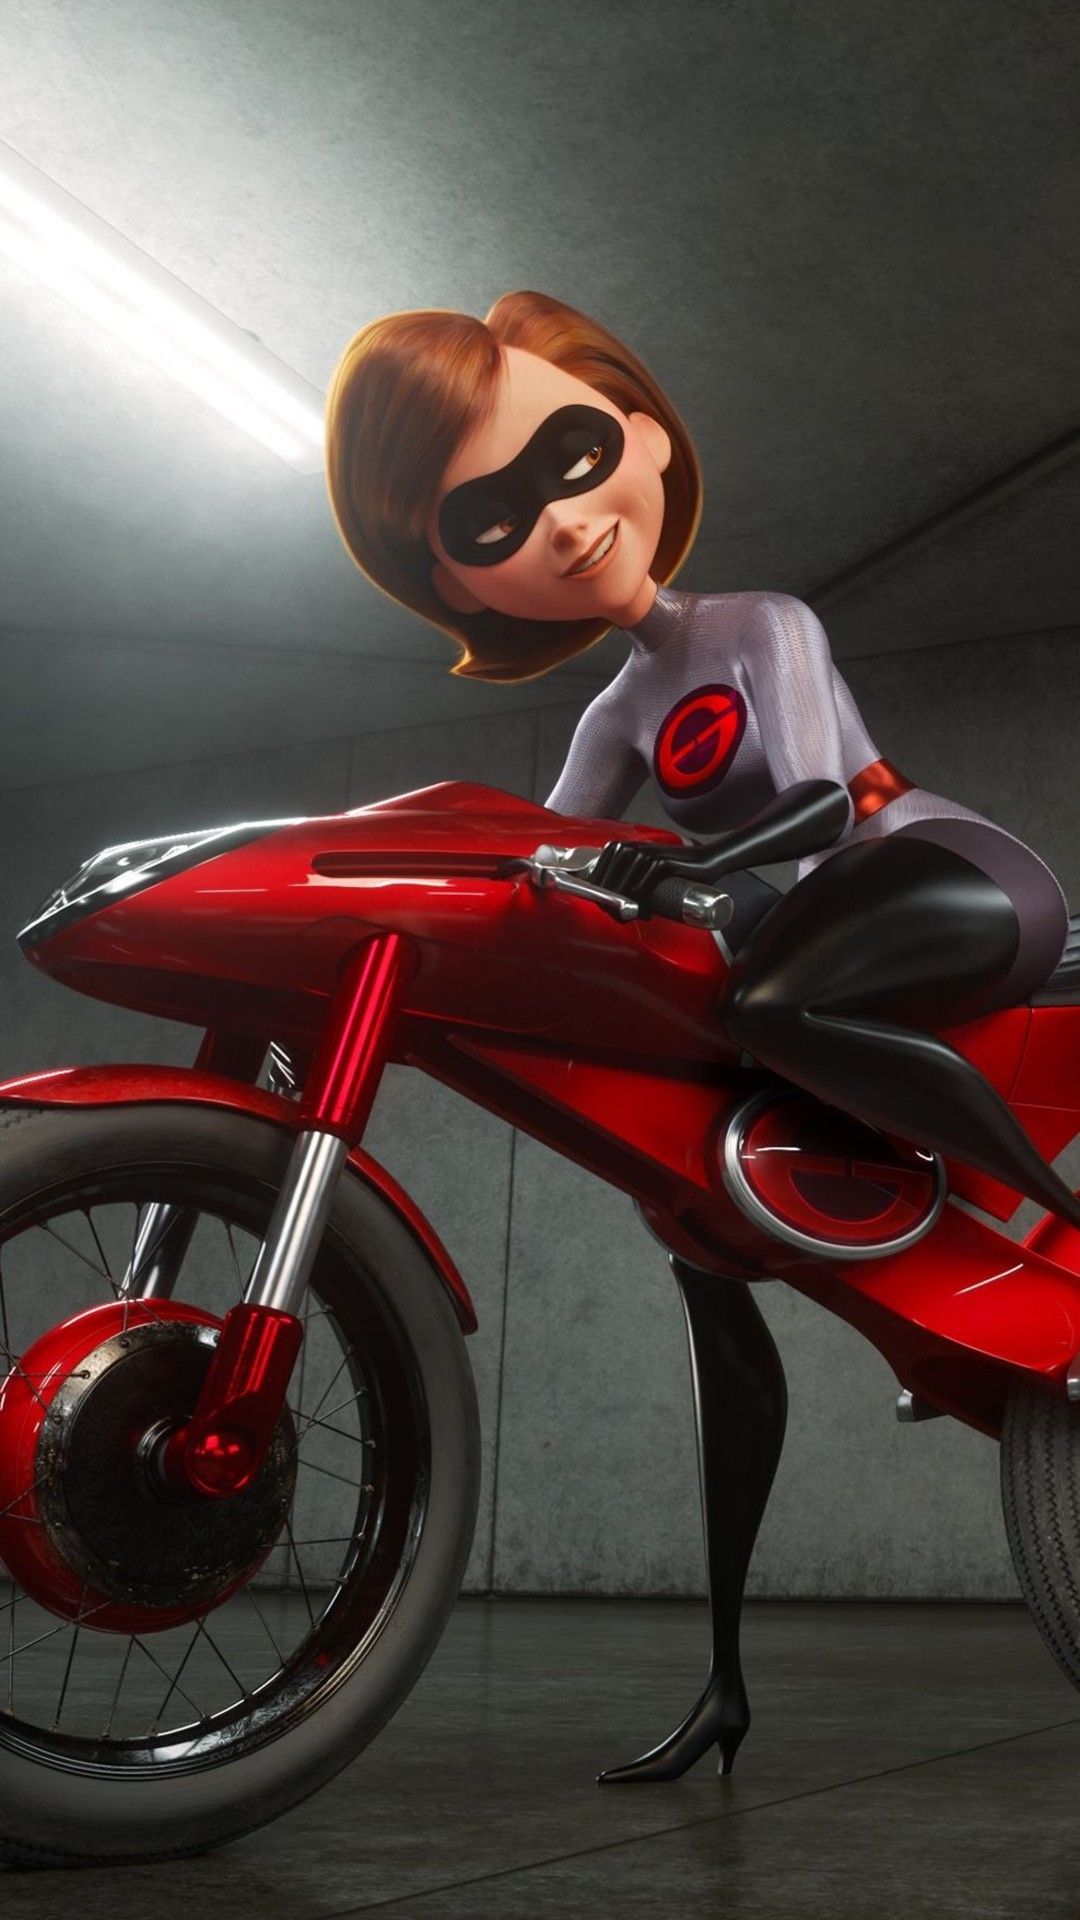 1080x1920 Image Result For Elastigirl Motorcycle The Incredibles Disney Incredibles Incredibles Wallpaper